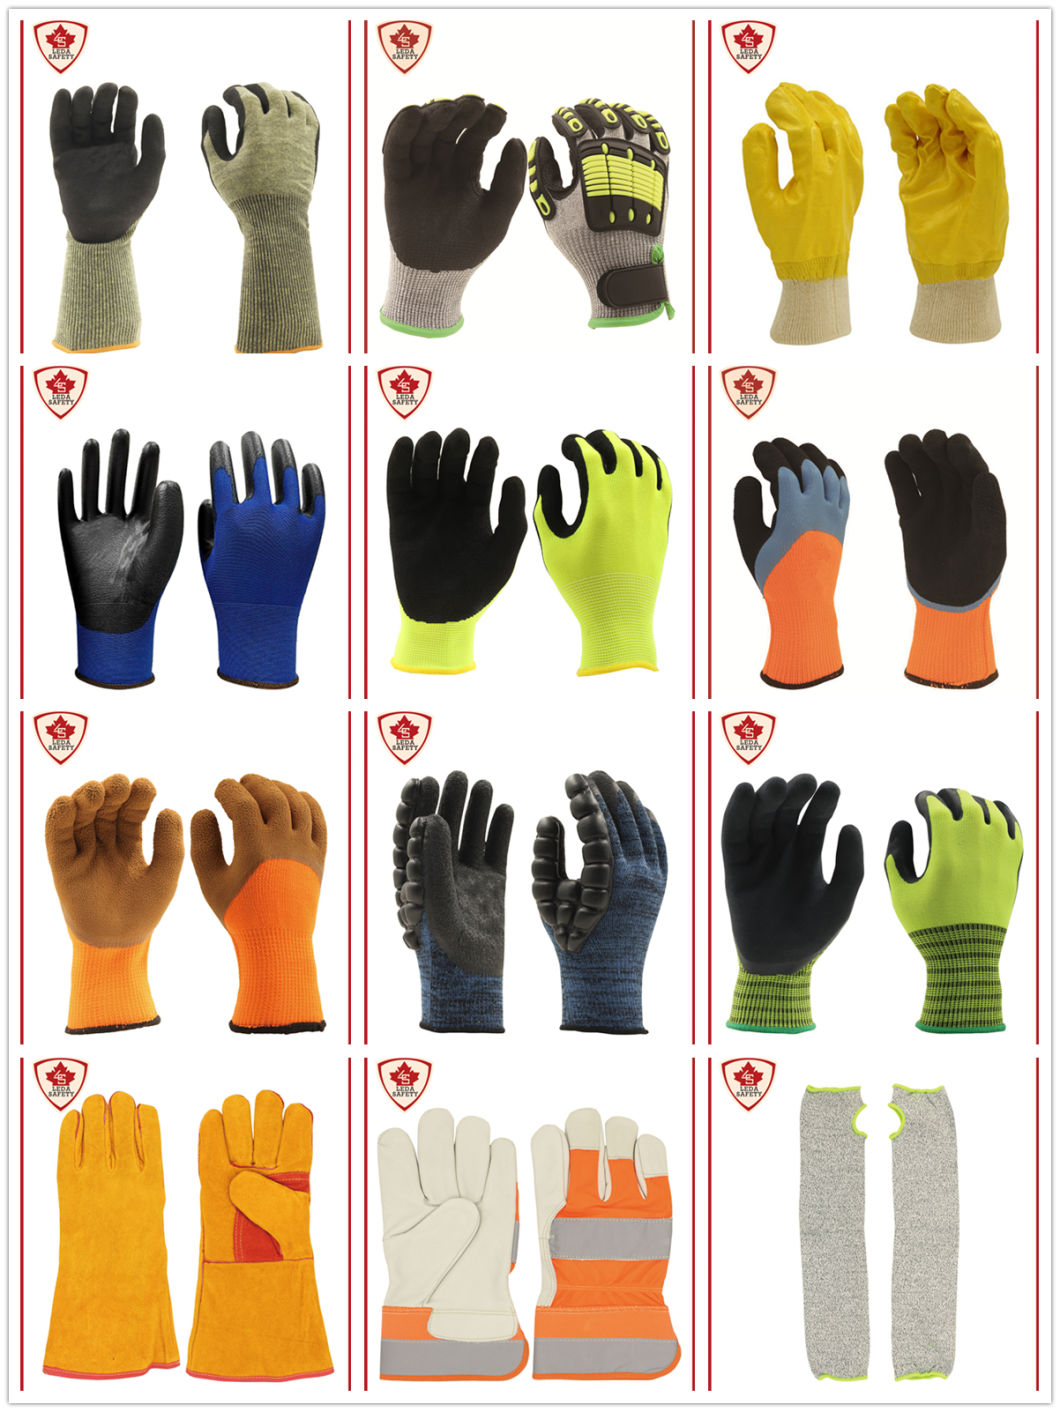 Puncture Resistant Cow Grain Leather Single Palm Work Gloves